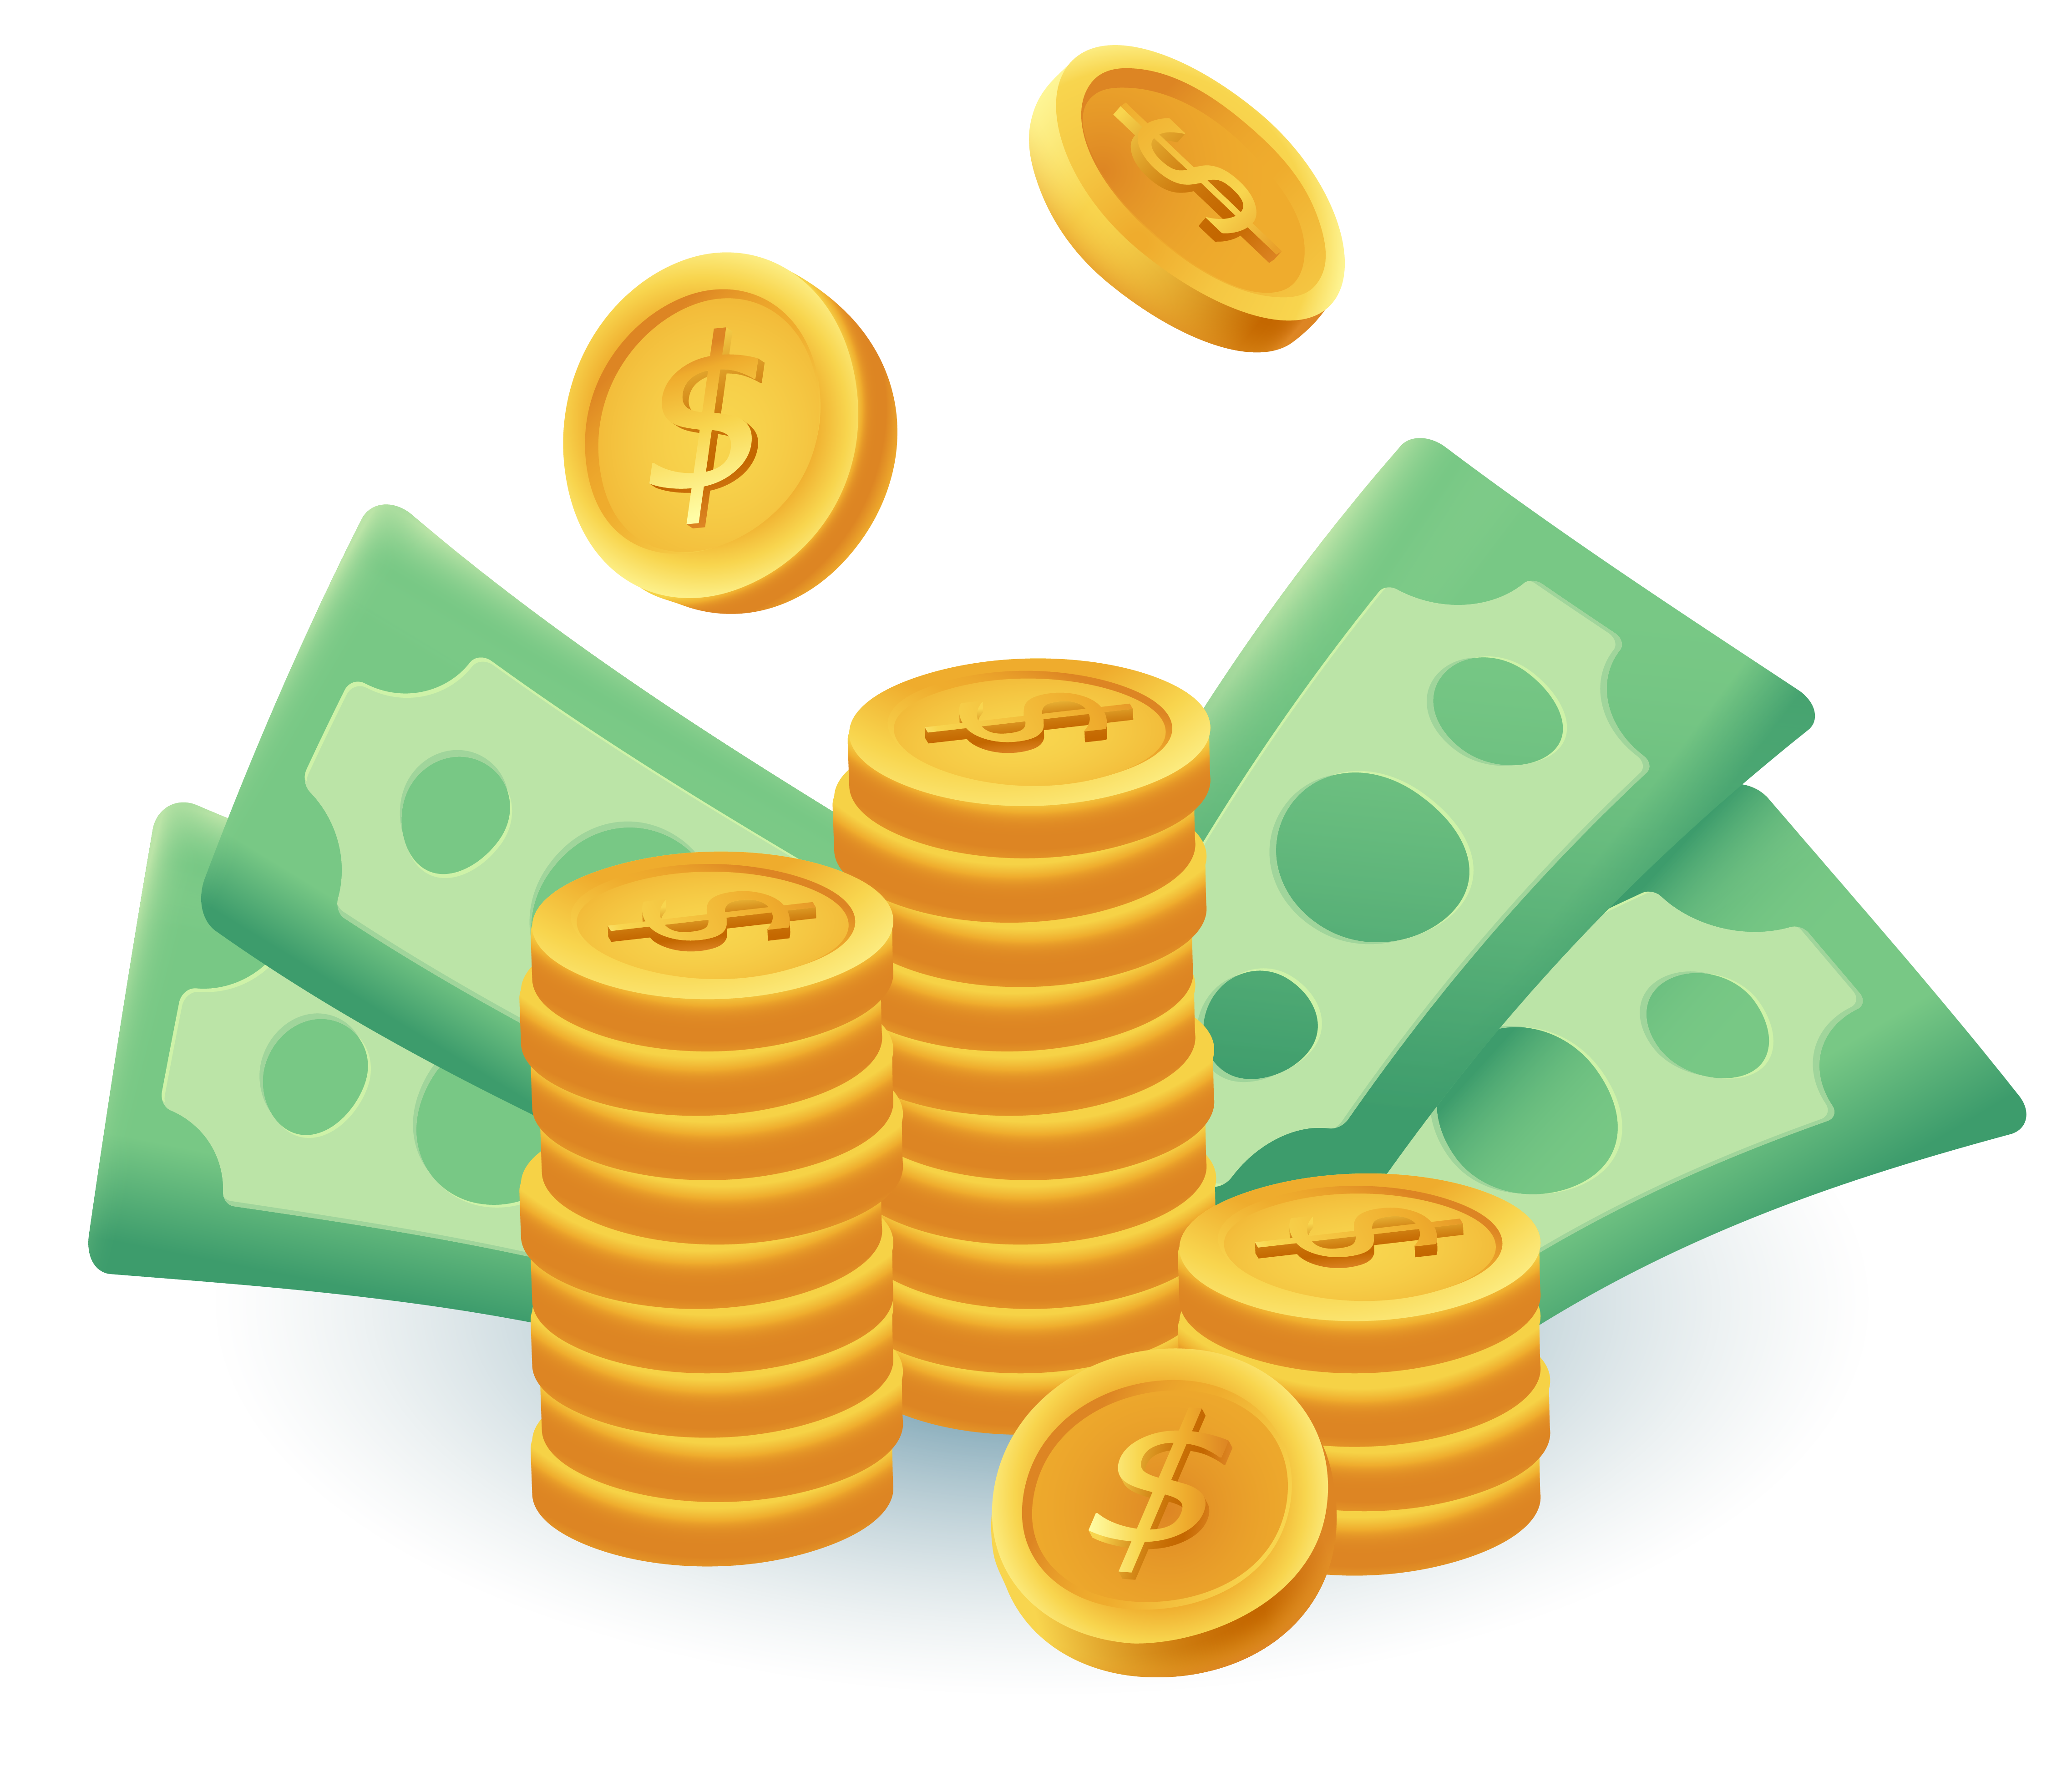 Gold coins and banknotes image